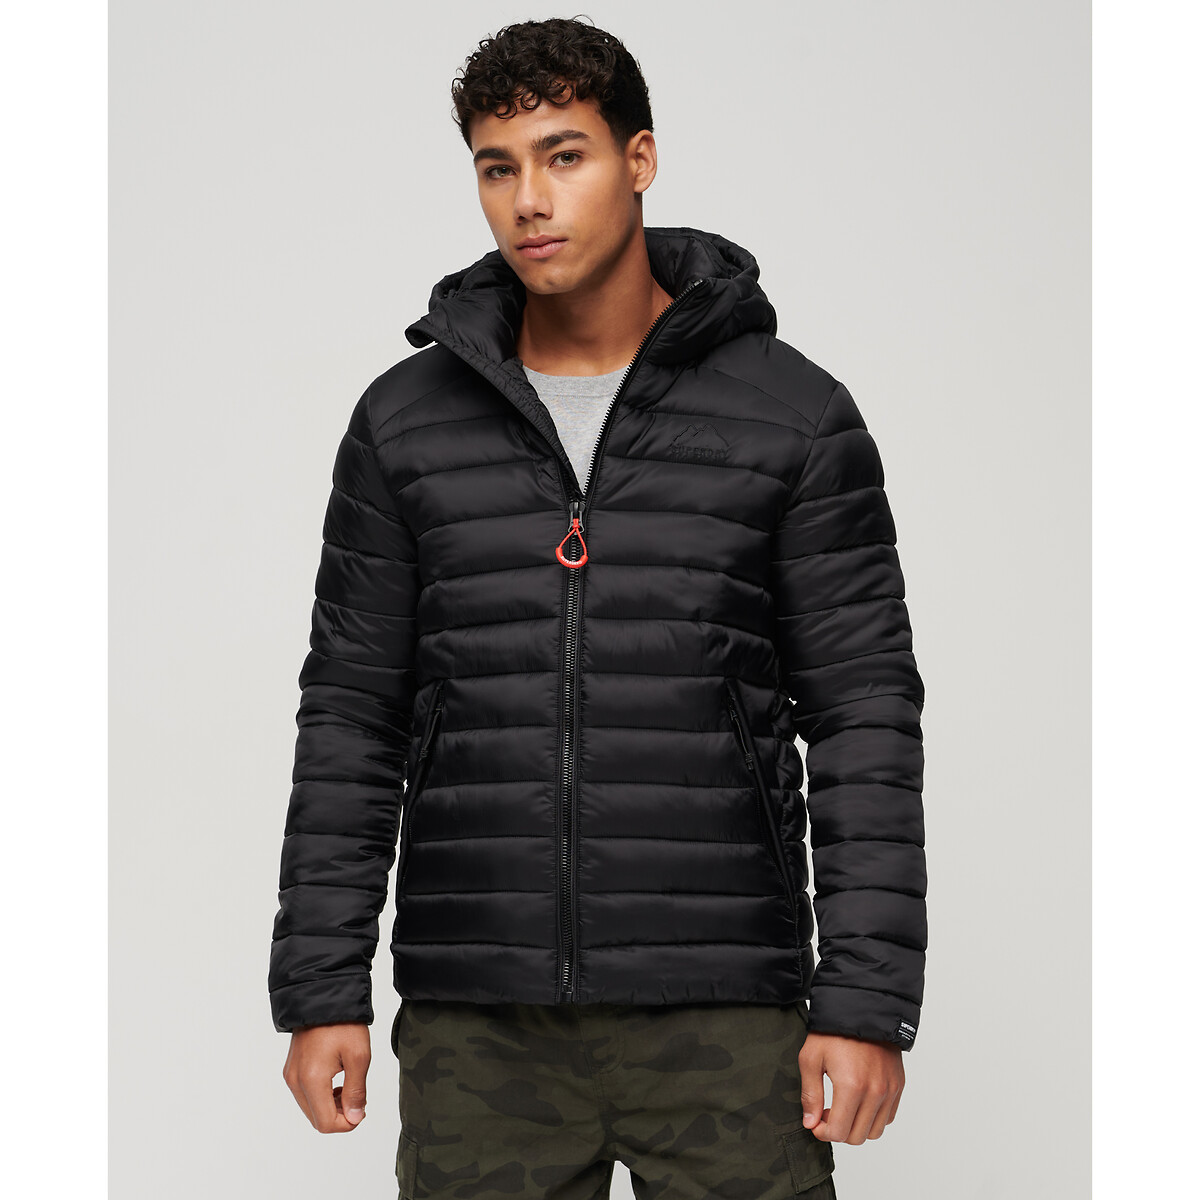 Fuji sport embroidered hood quilted logo Redoute with jacket La | and padded Superdry